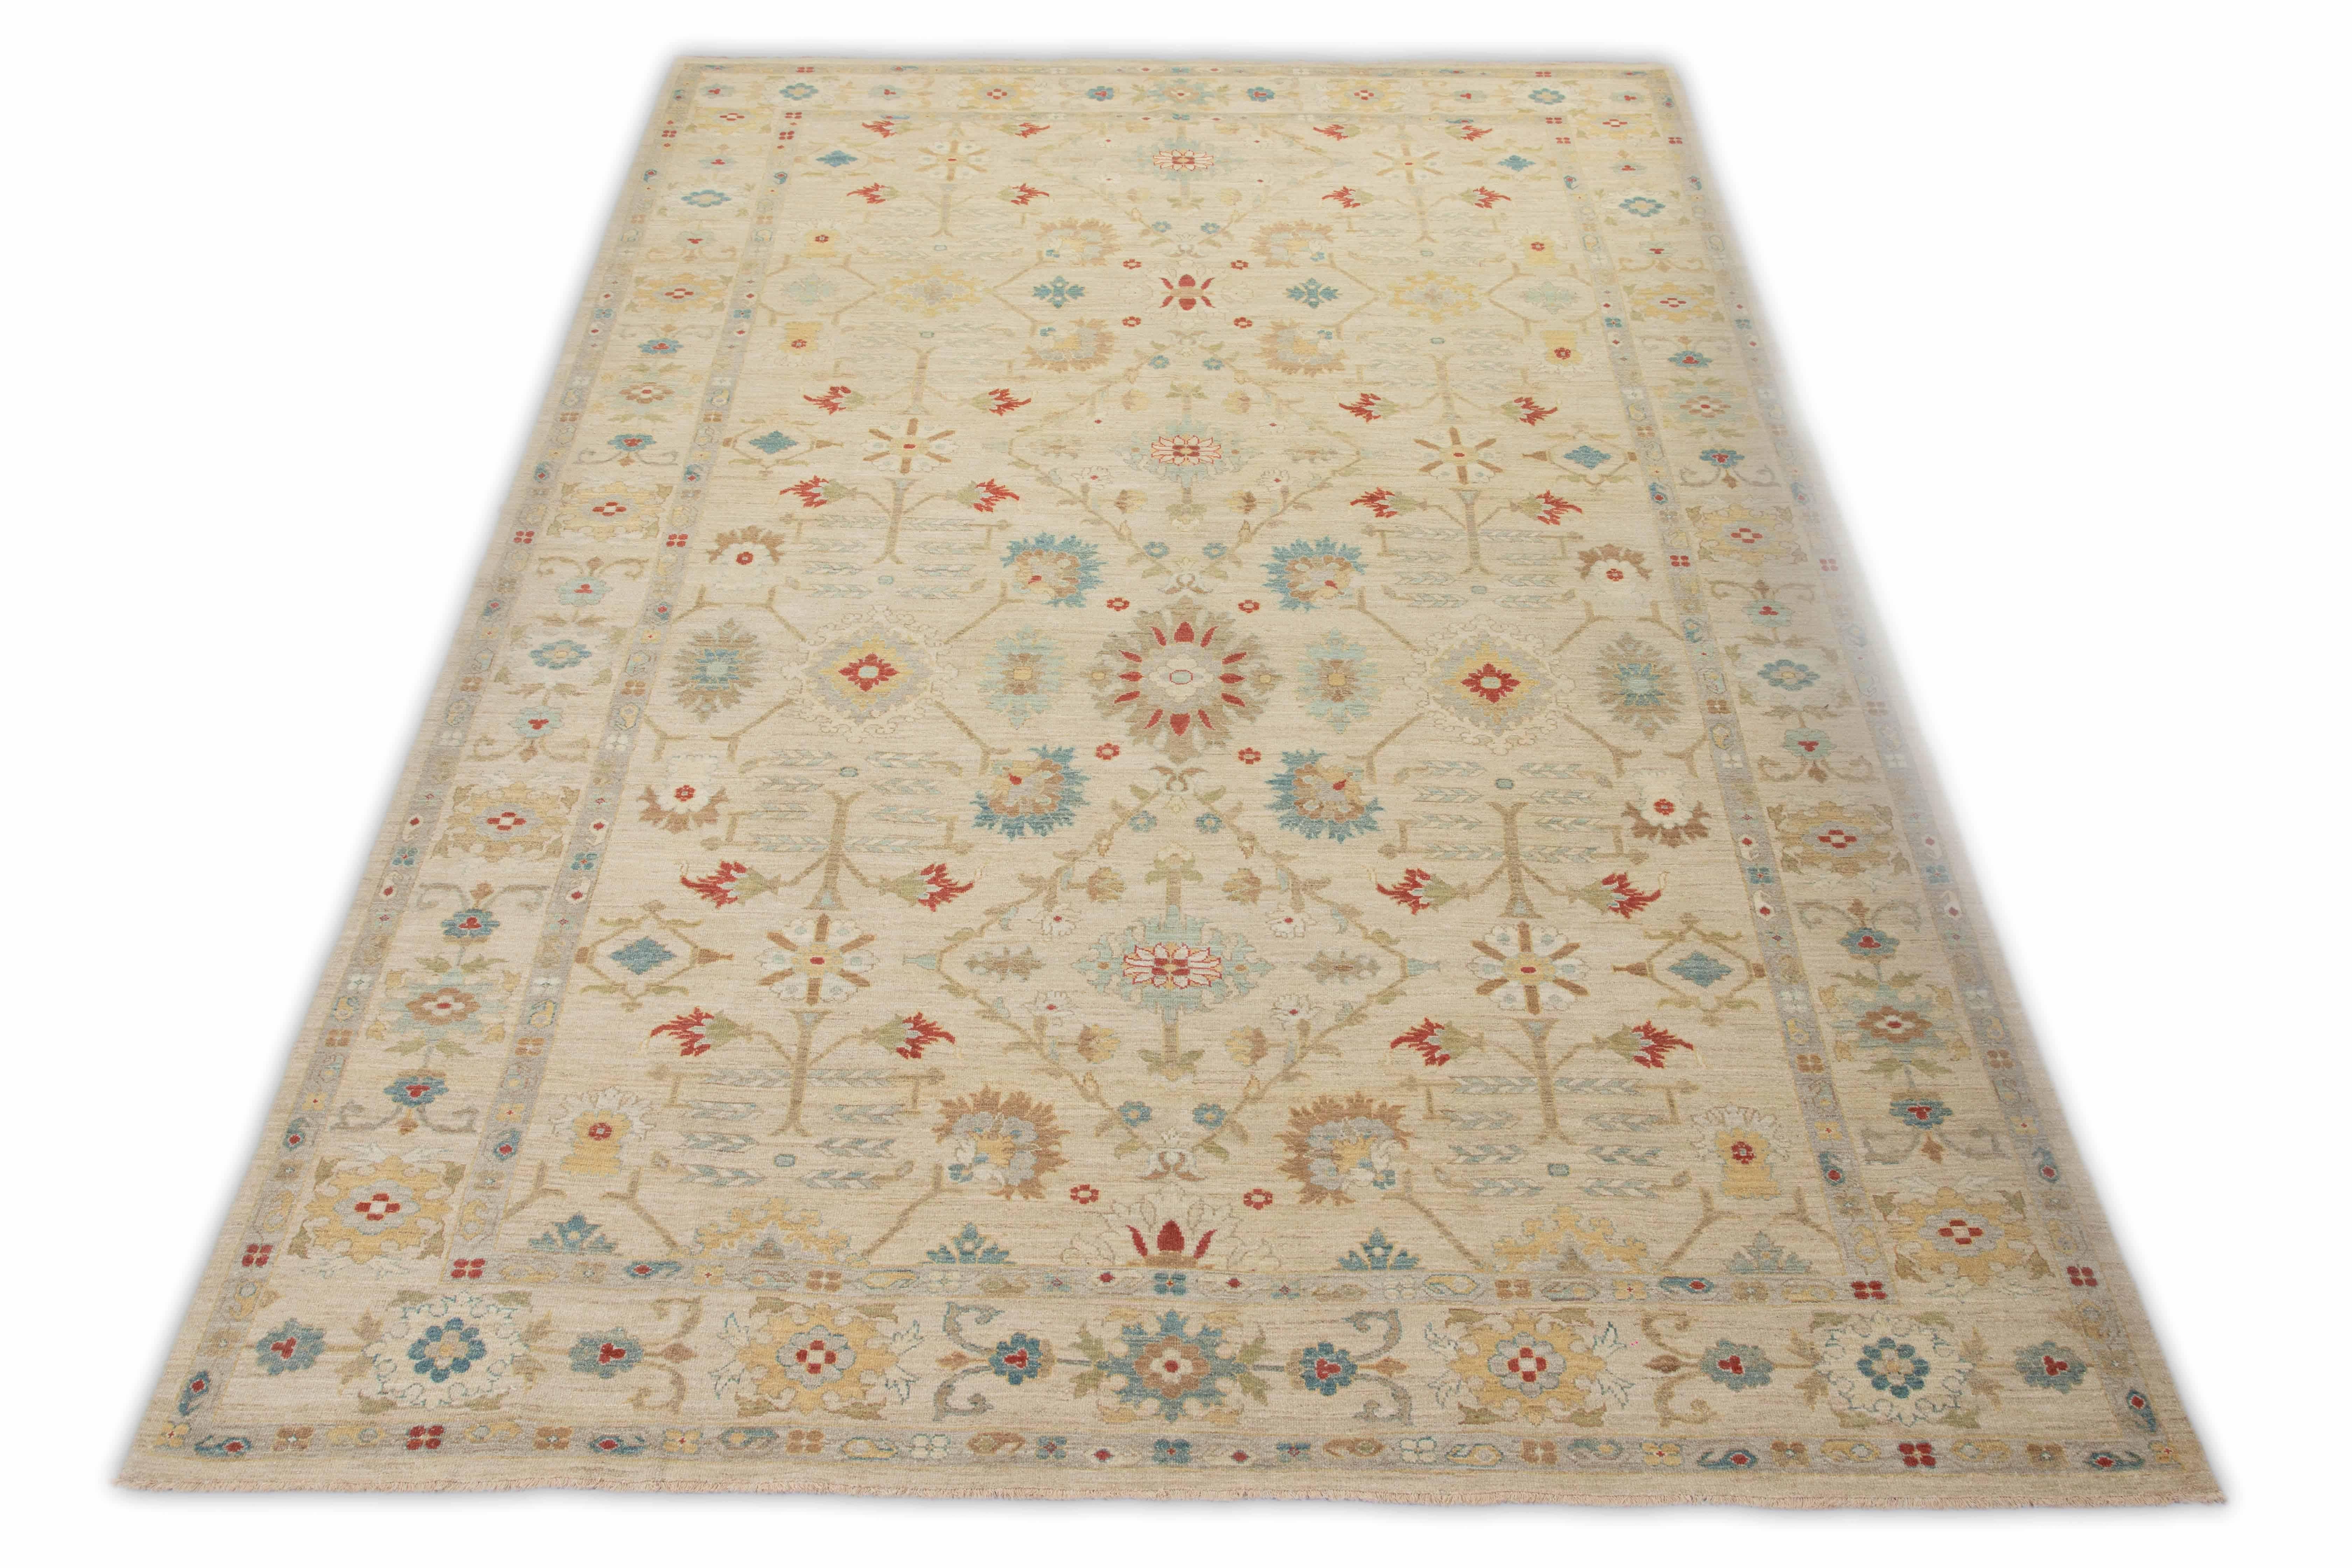 Islamic Contemporary Turkish Sultanabad Style Rug with Herati Patterns in Blue and Red For Sale